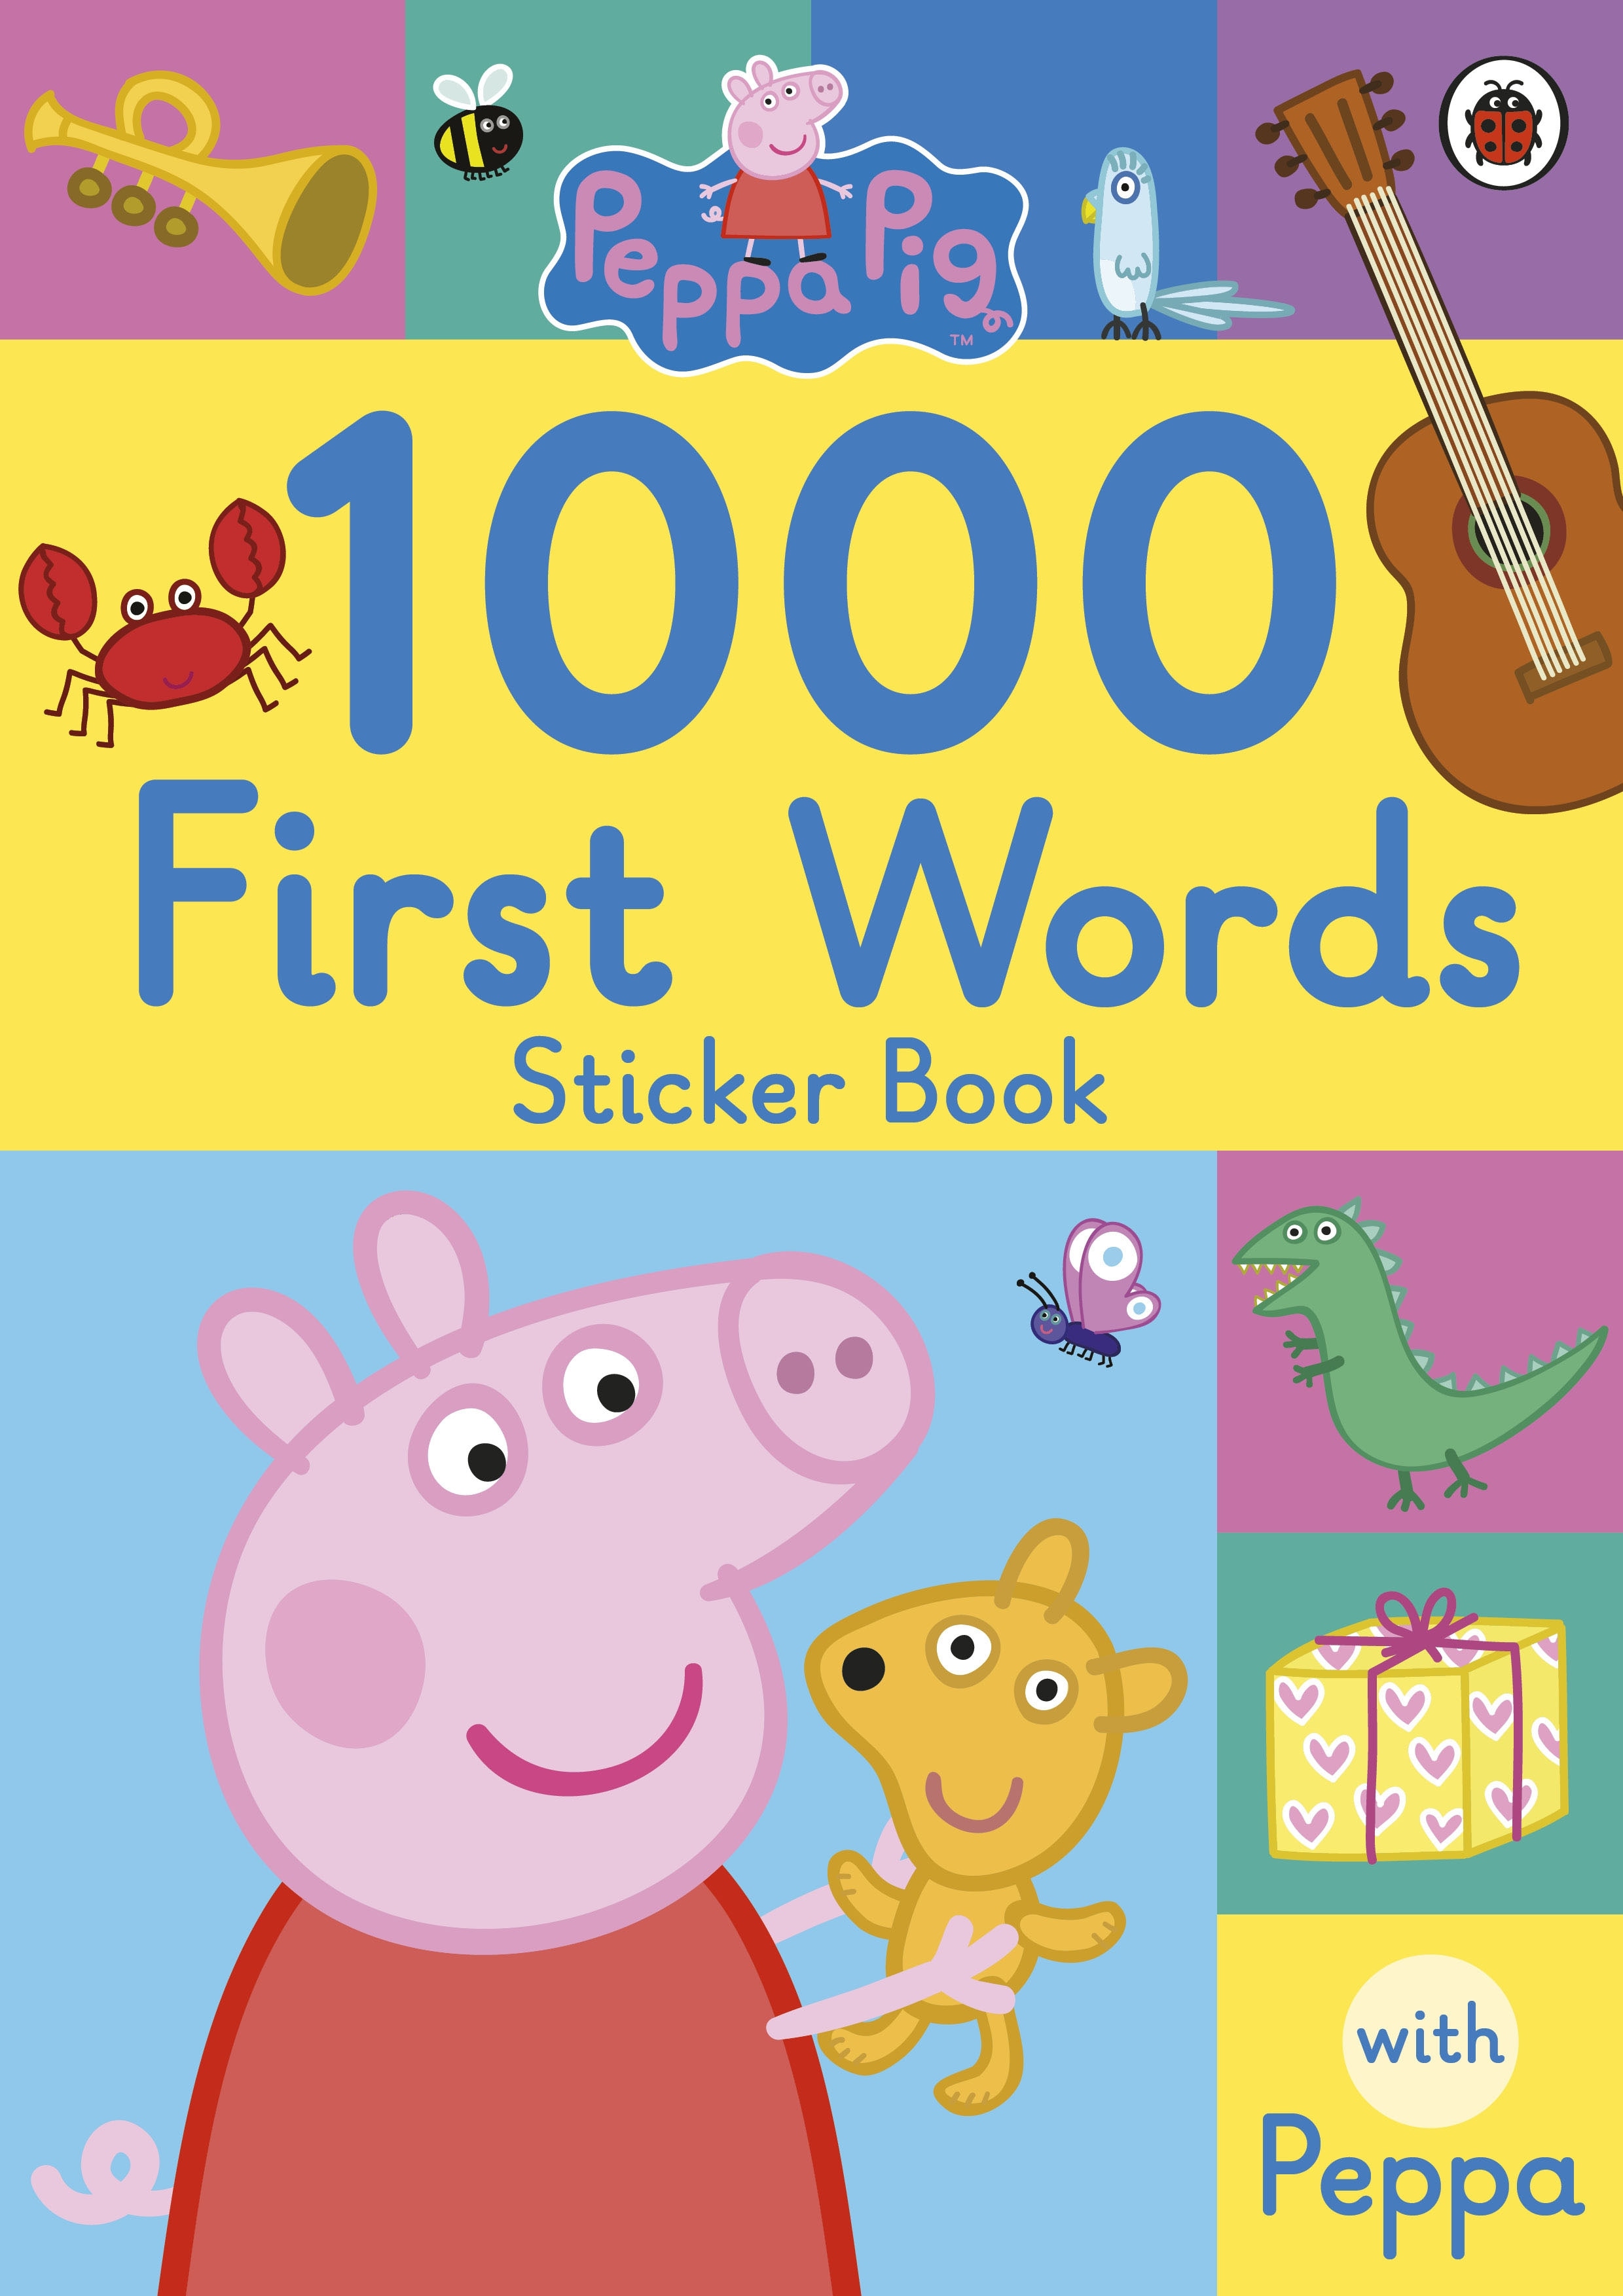 Book “Peppa Pig: 1000 First Words Sticker Book” by Peppa Pig — July 13, 2017